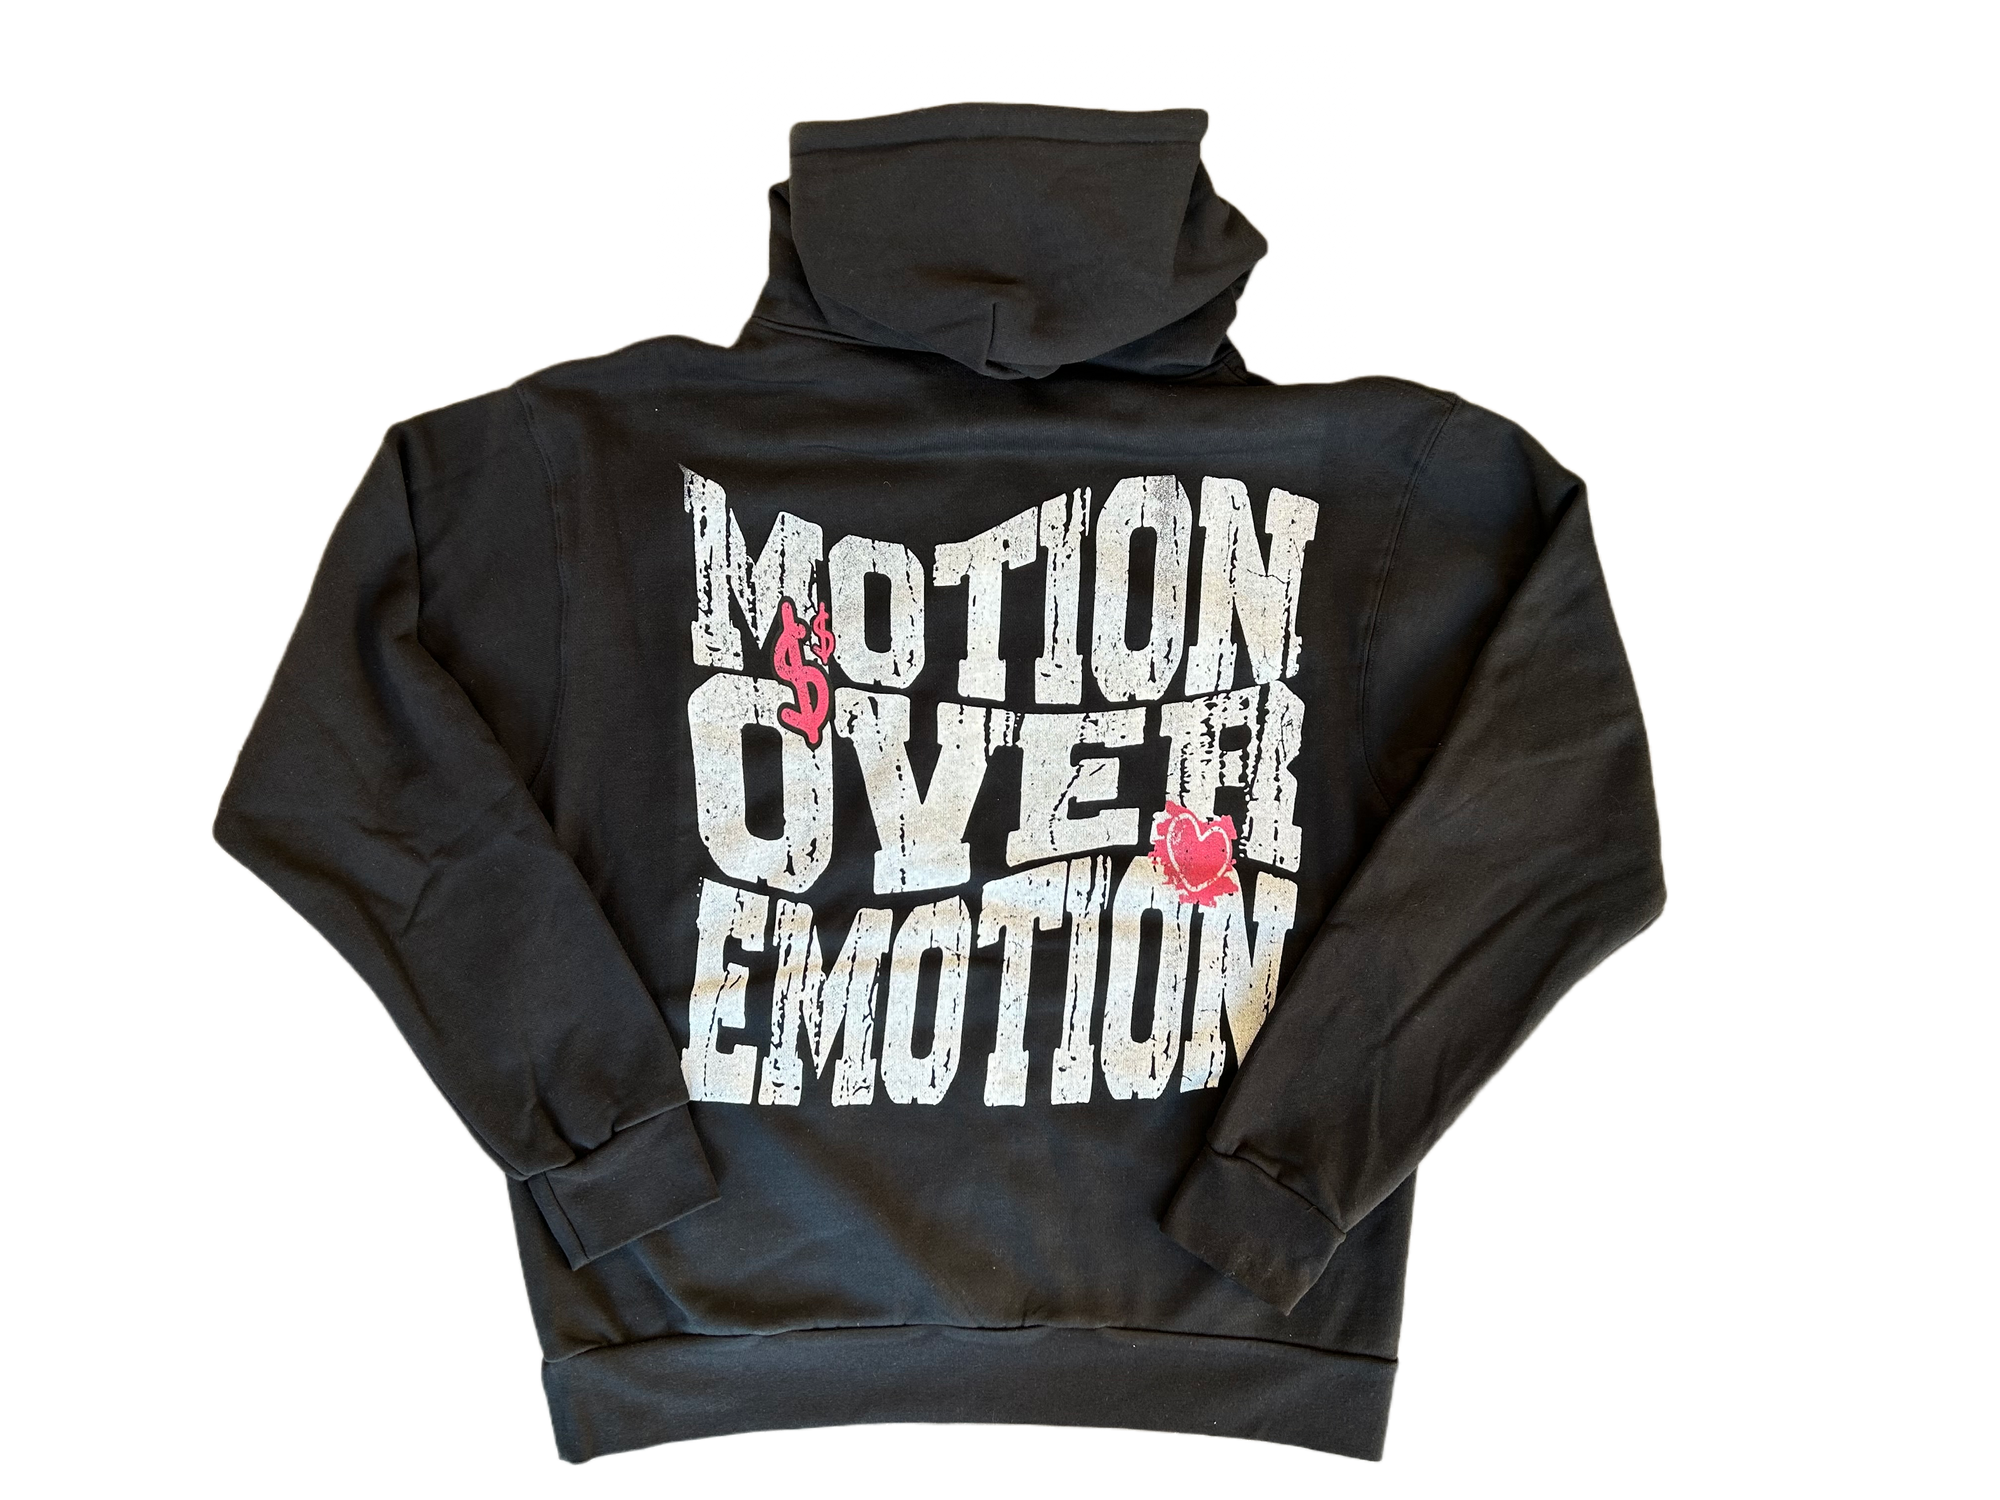 The Holidays Get Me Emo-tional White Print Black Pullover Hoodie - Size Medium